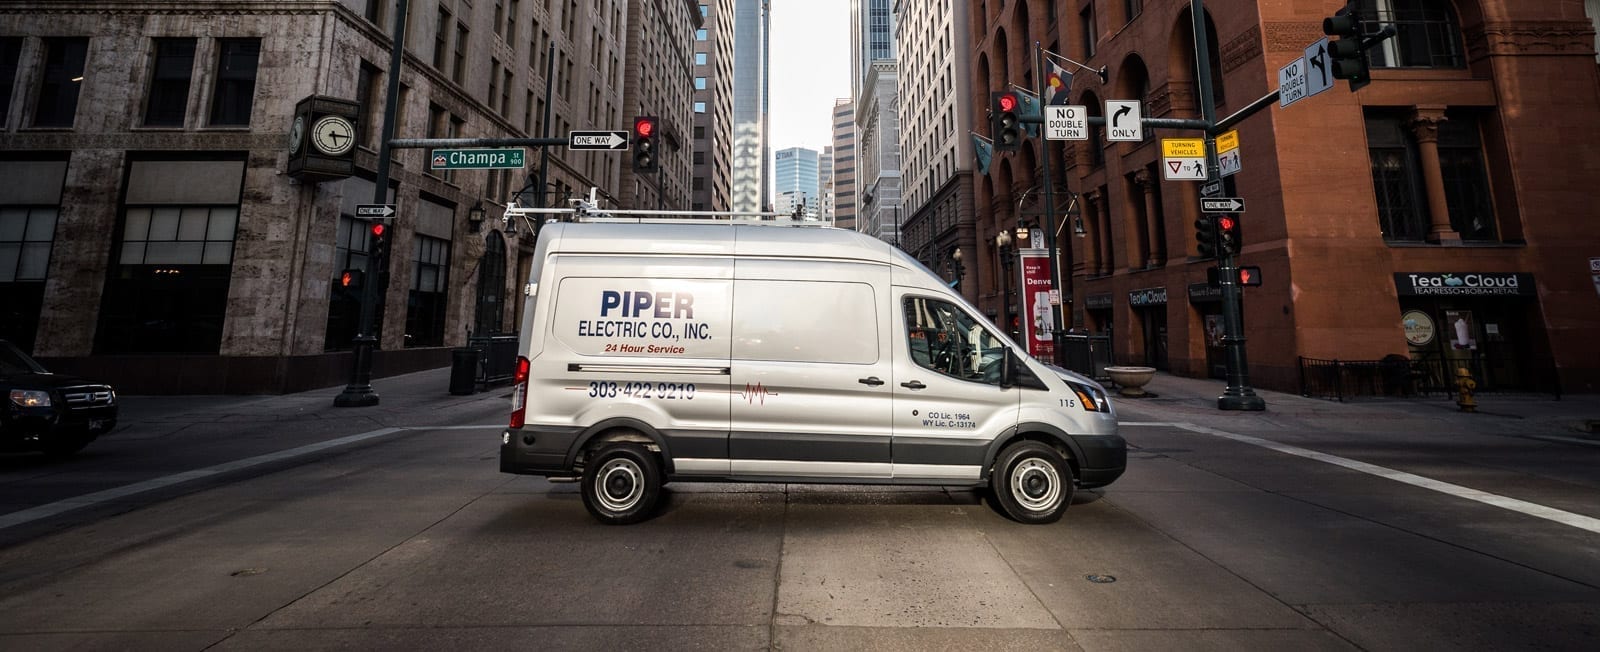 Piper Electrical Services